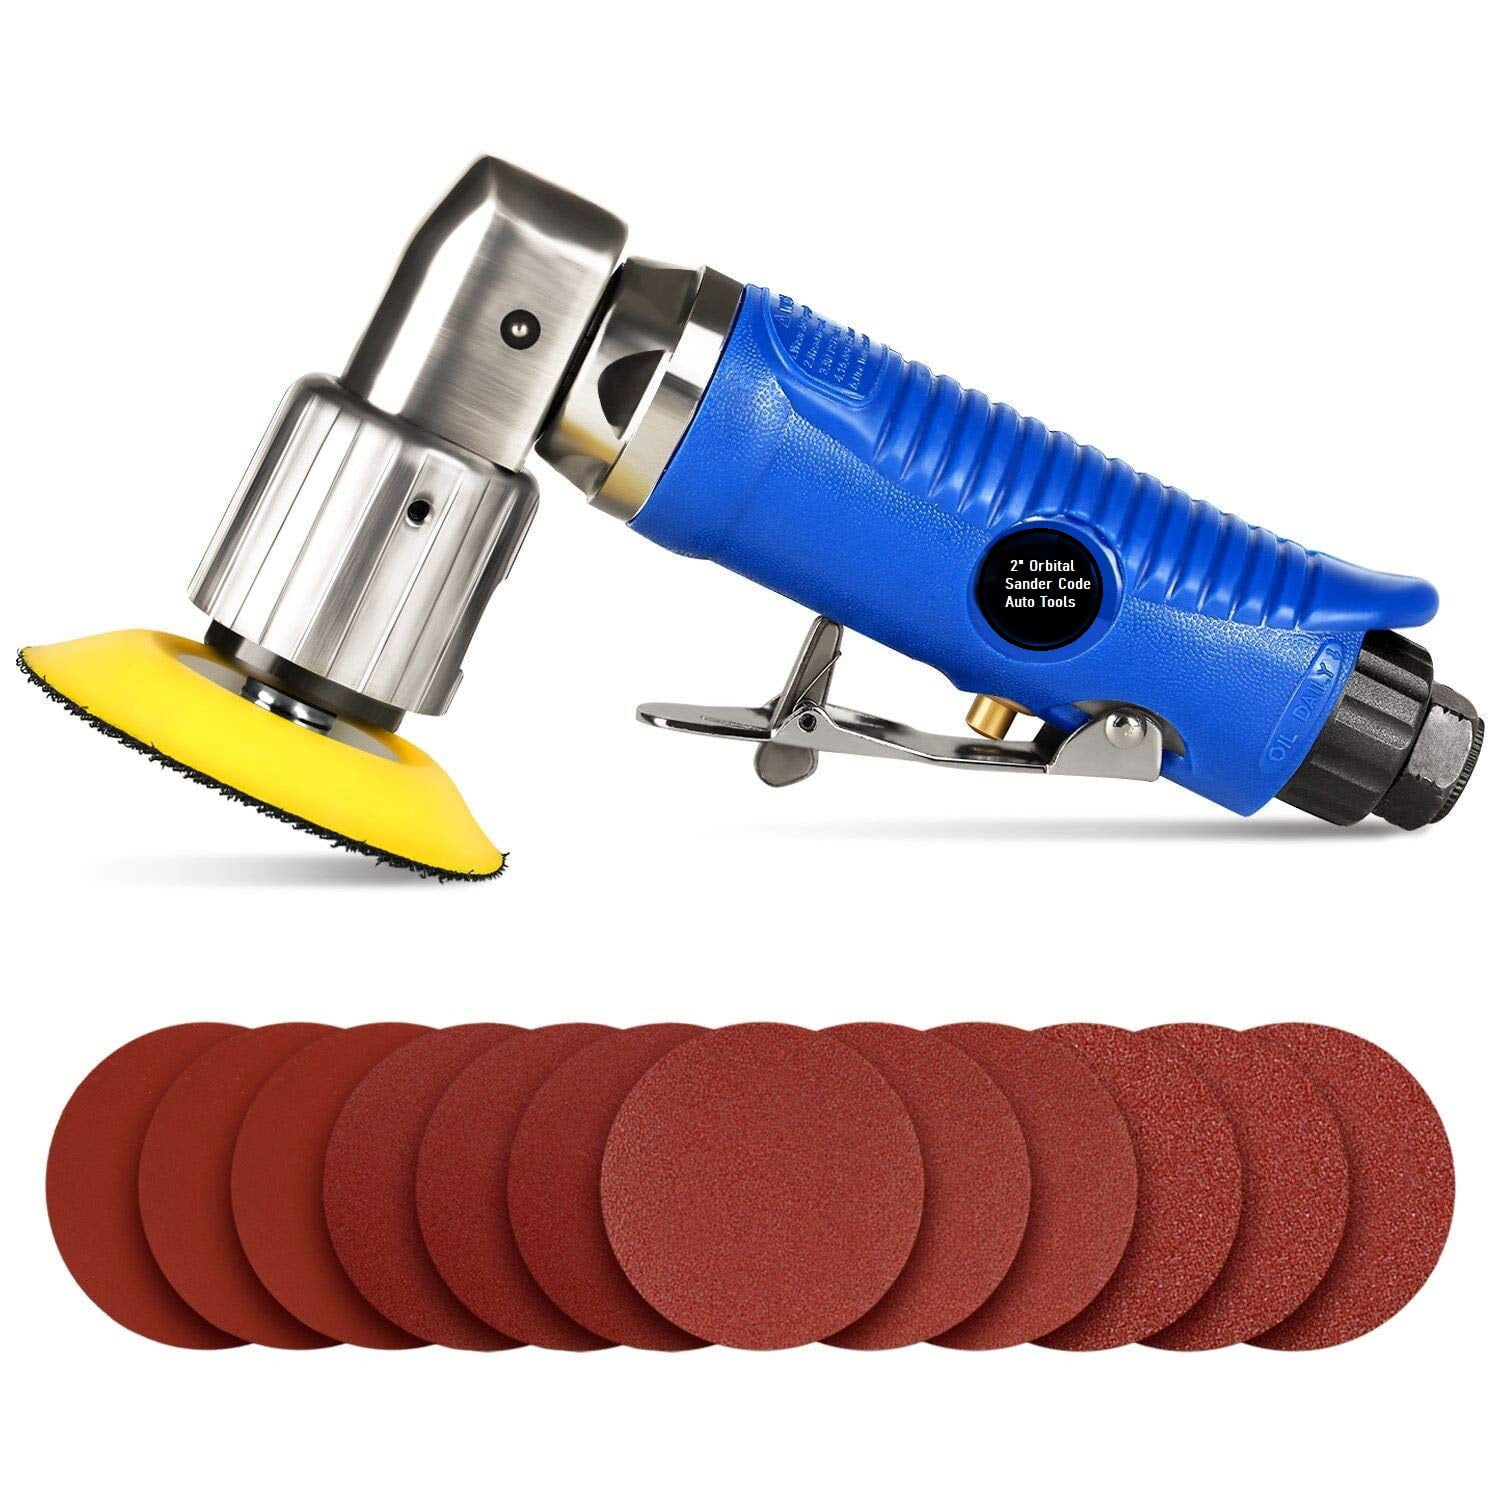 2" Mini Orbital 90 Degree ANGLE AIR SANDER TOOL Hook and Loop with Discs and Pad 